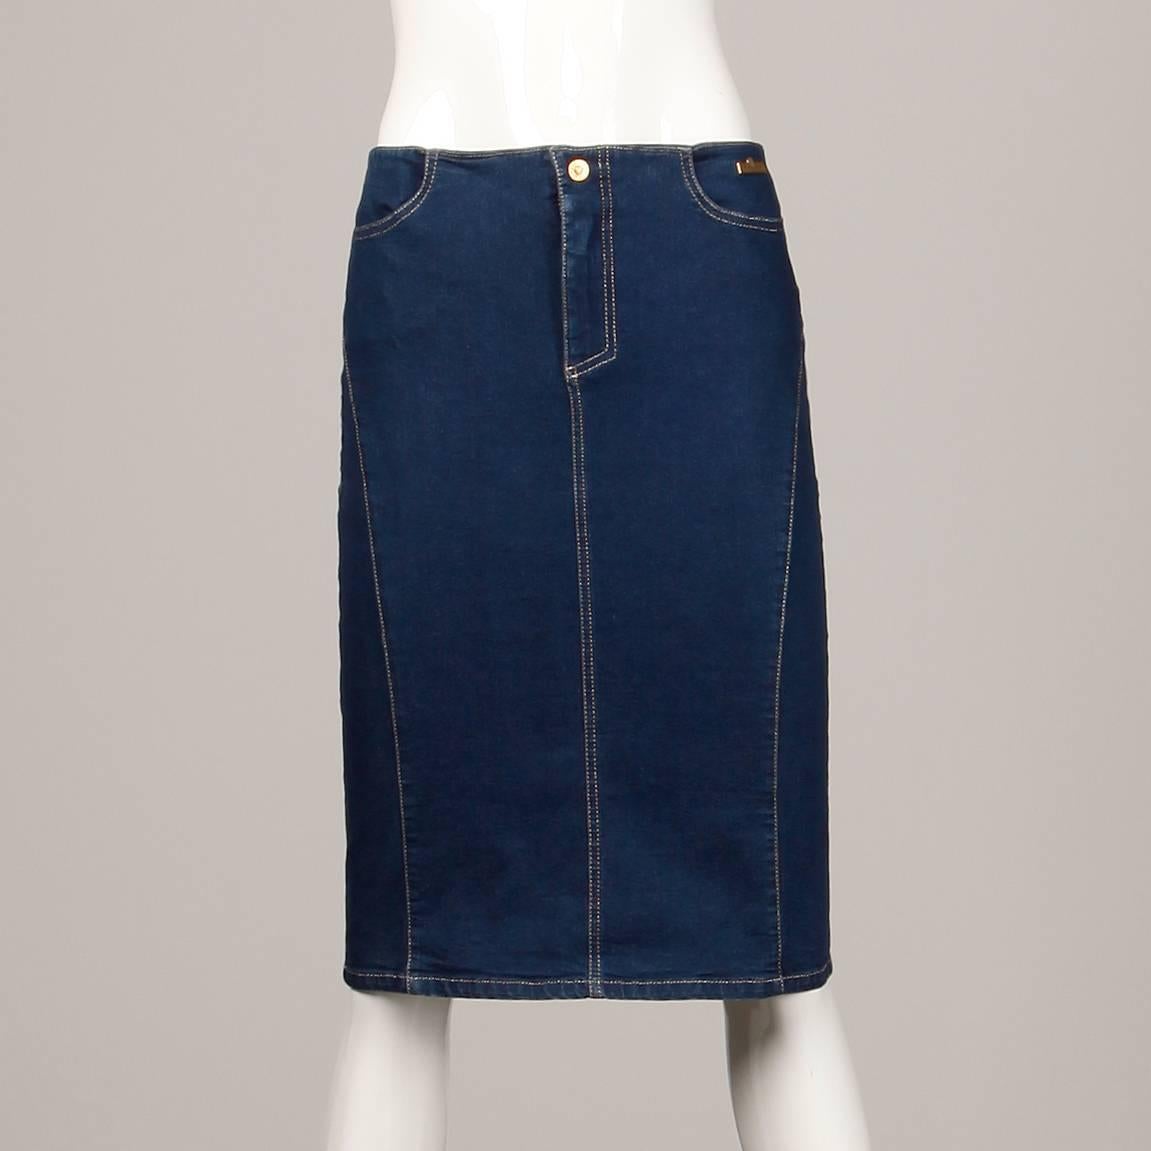 Low waisted Versace jean skirt made of dark stretch denim. Unlined with front zip and button closure. Two front pockets. 88% Cotton, 11% nylon, 1% other. The marked size is 30/44. The low waist measures 30", hips 34" and total length